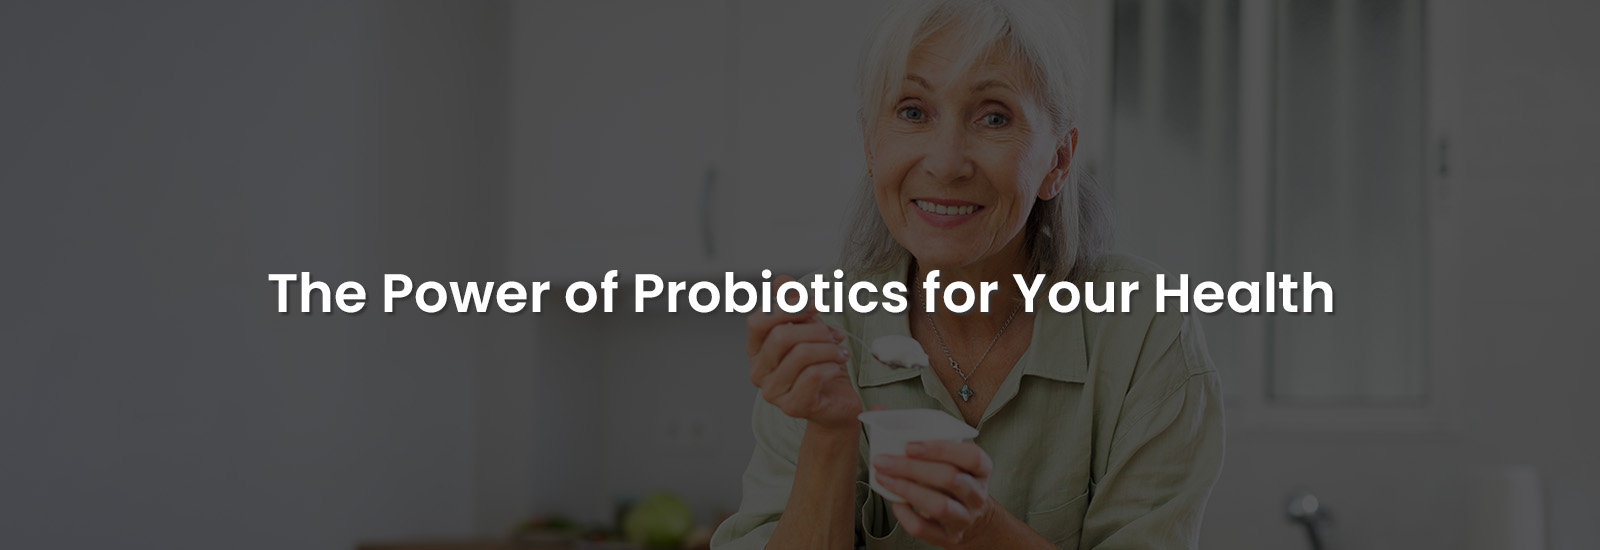 The Power of Probiotics for Your Health | Banner Image